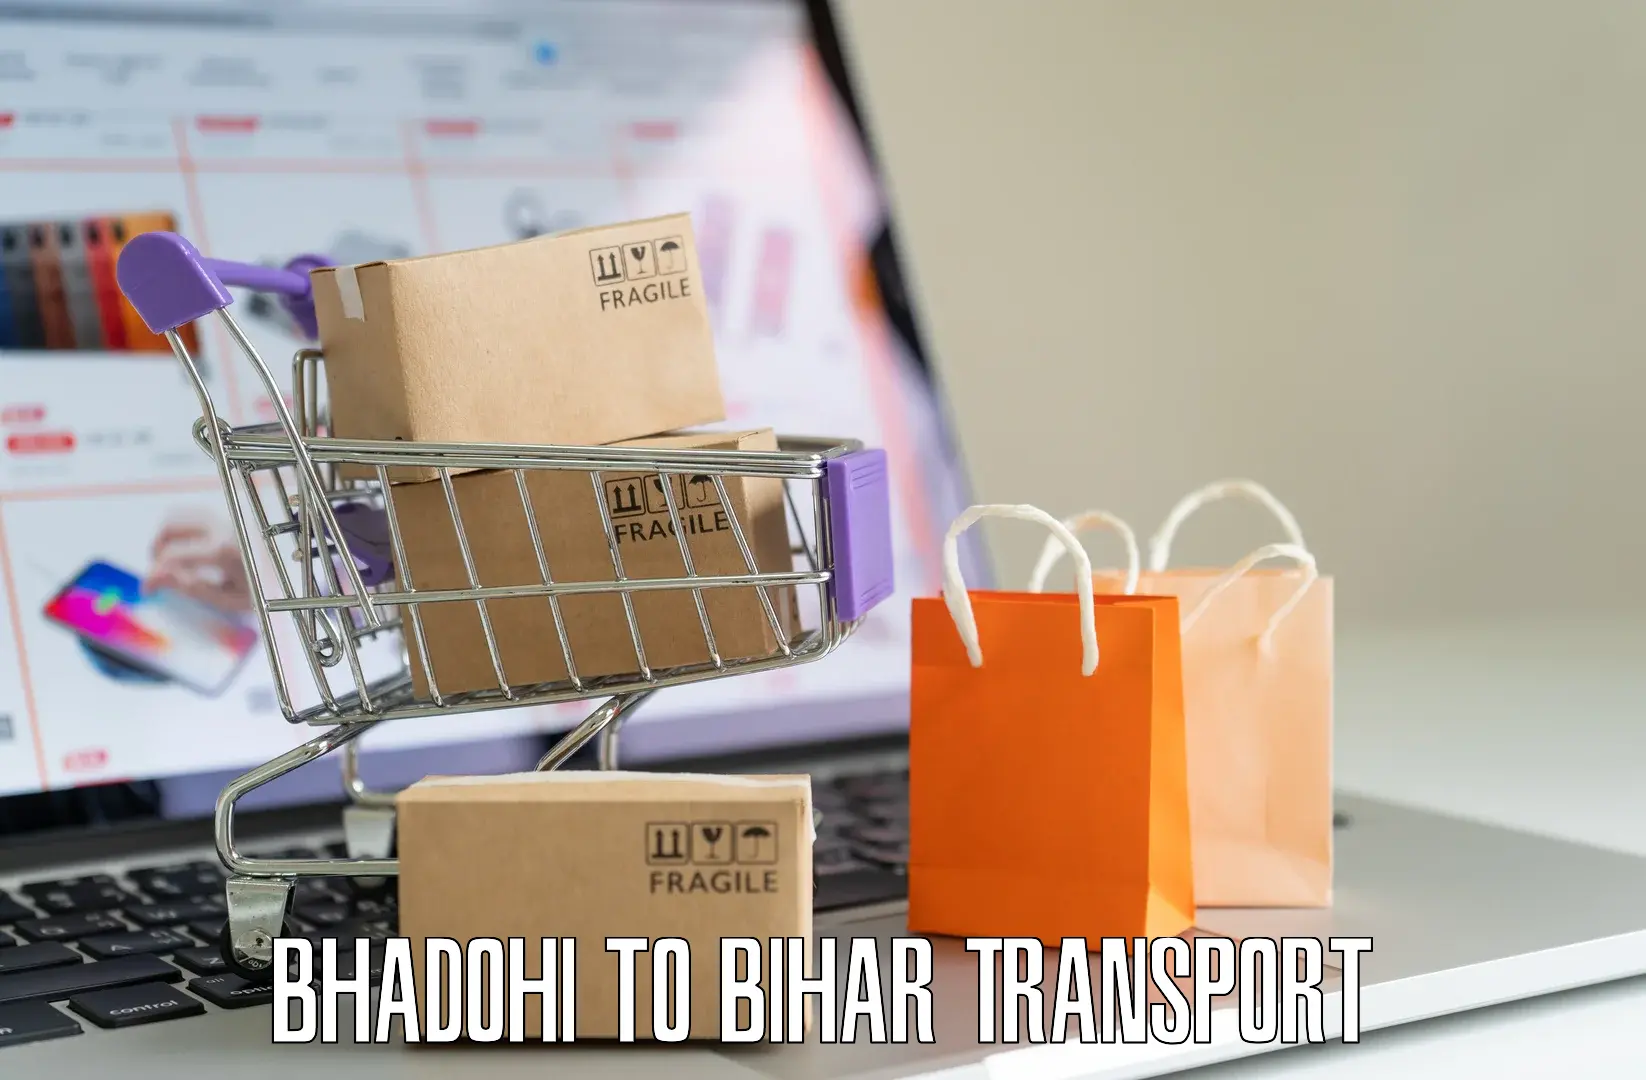 Transportation solution services Bhadohi to Buxar